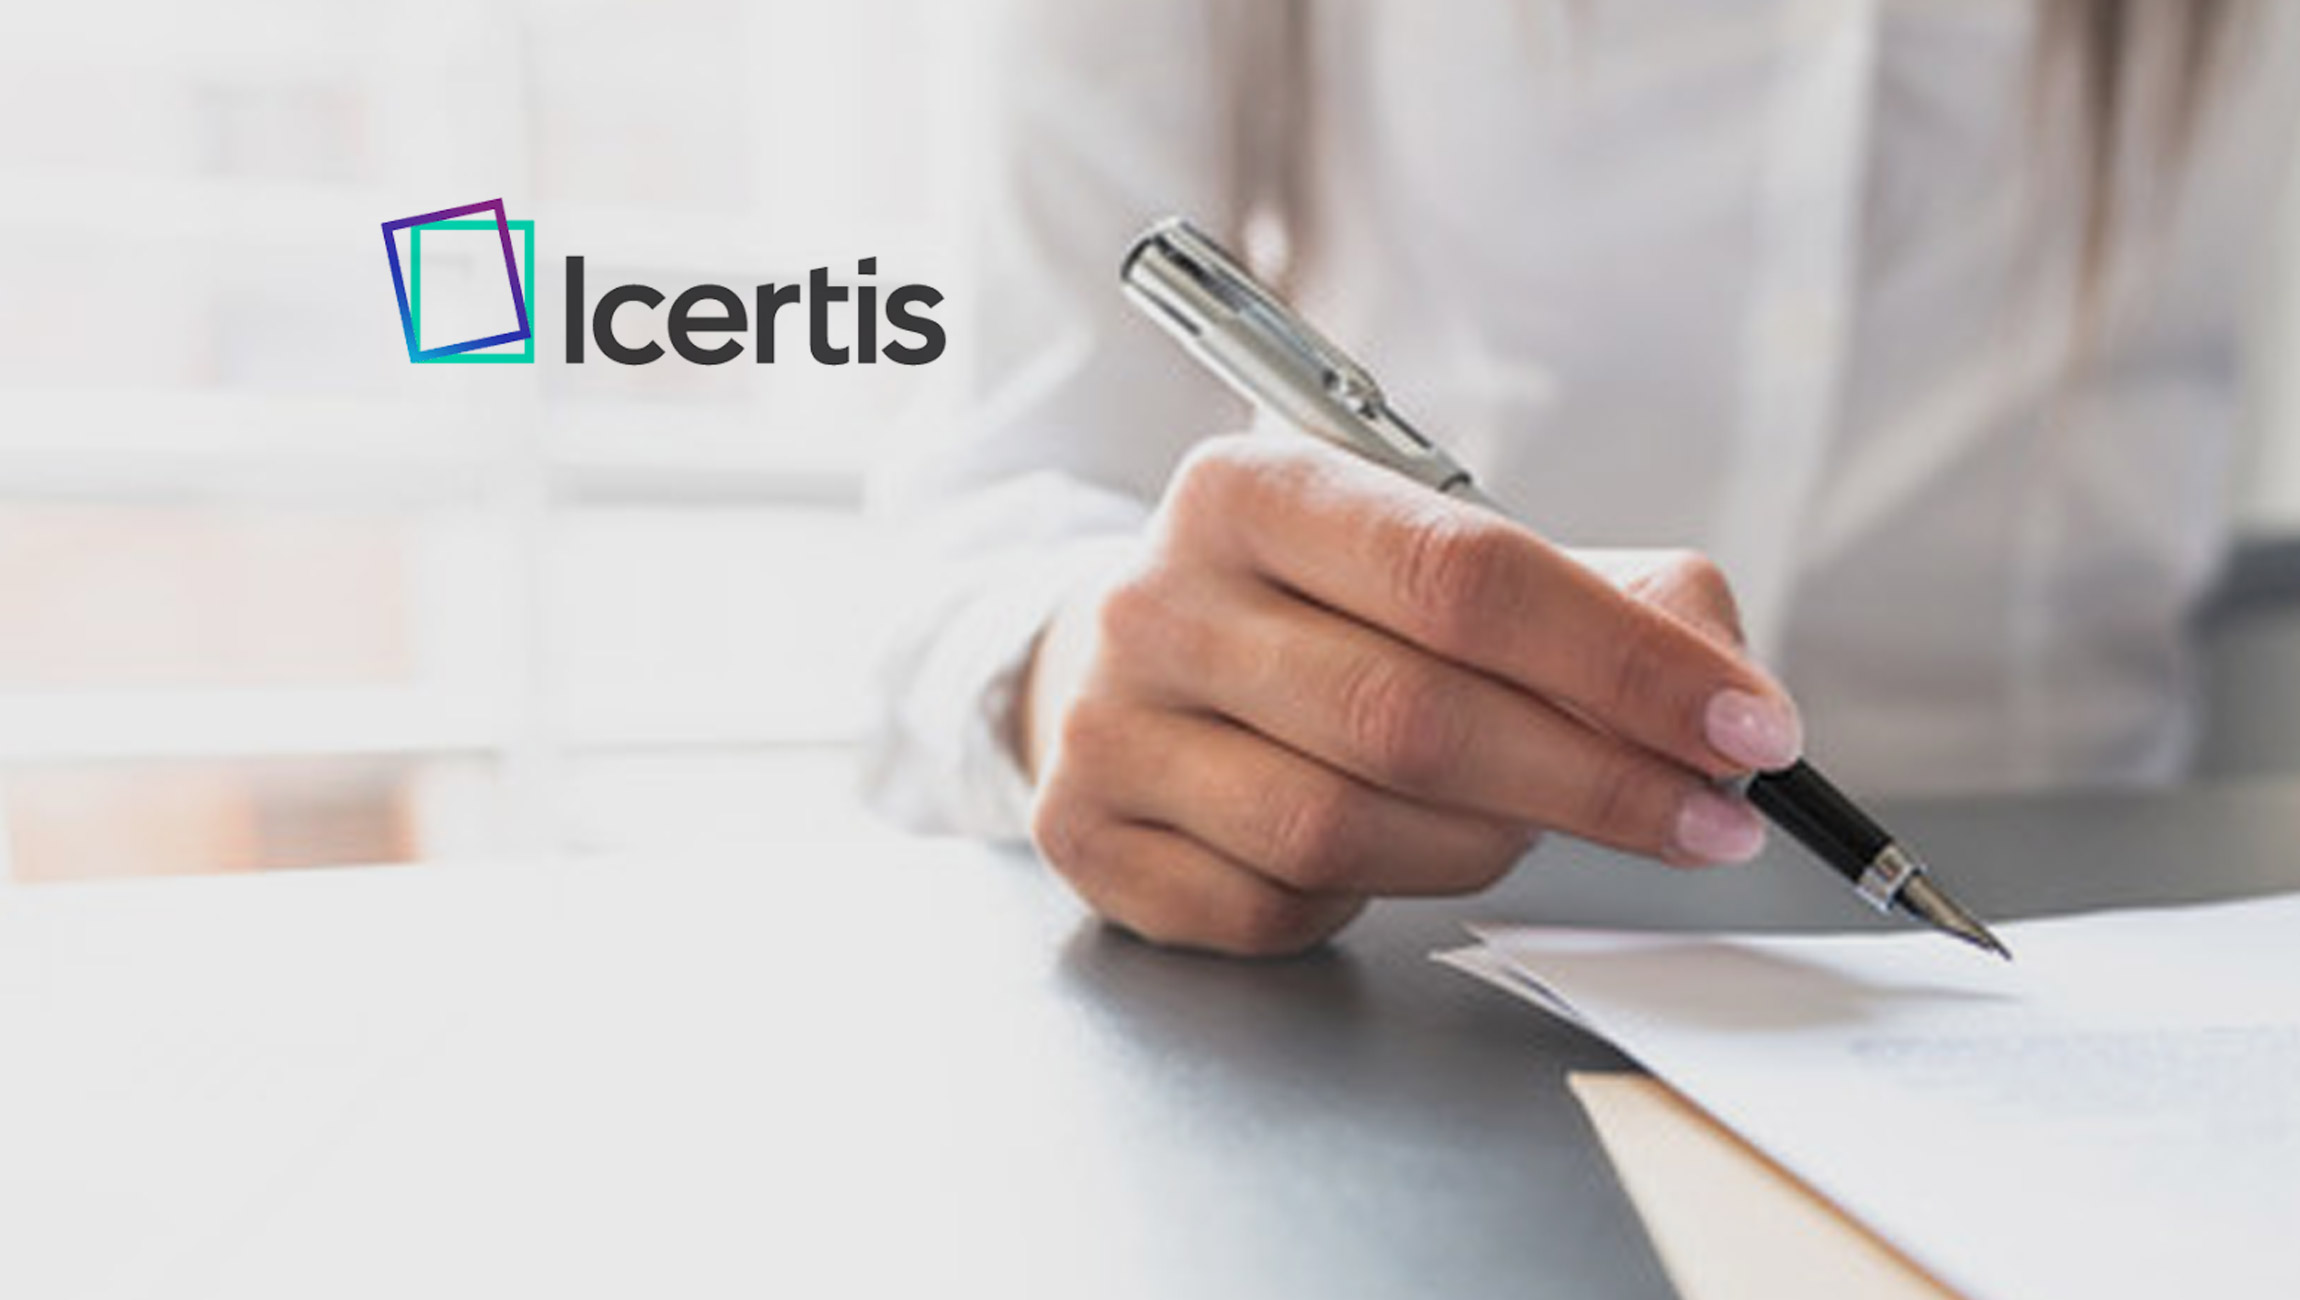 Pacsun-Selects-Icertis-to-Transform-Contract-Management